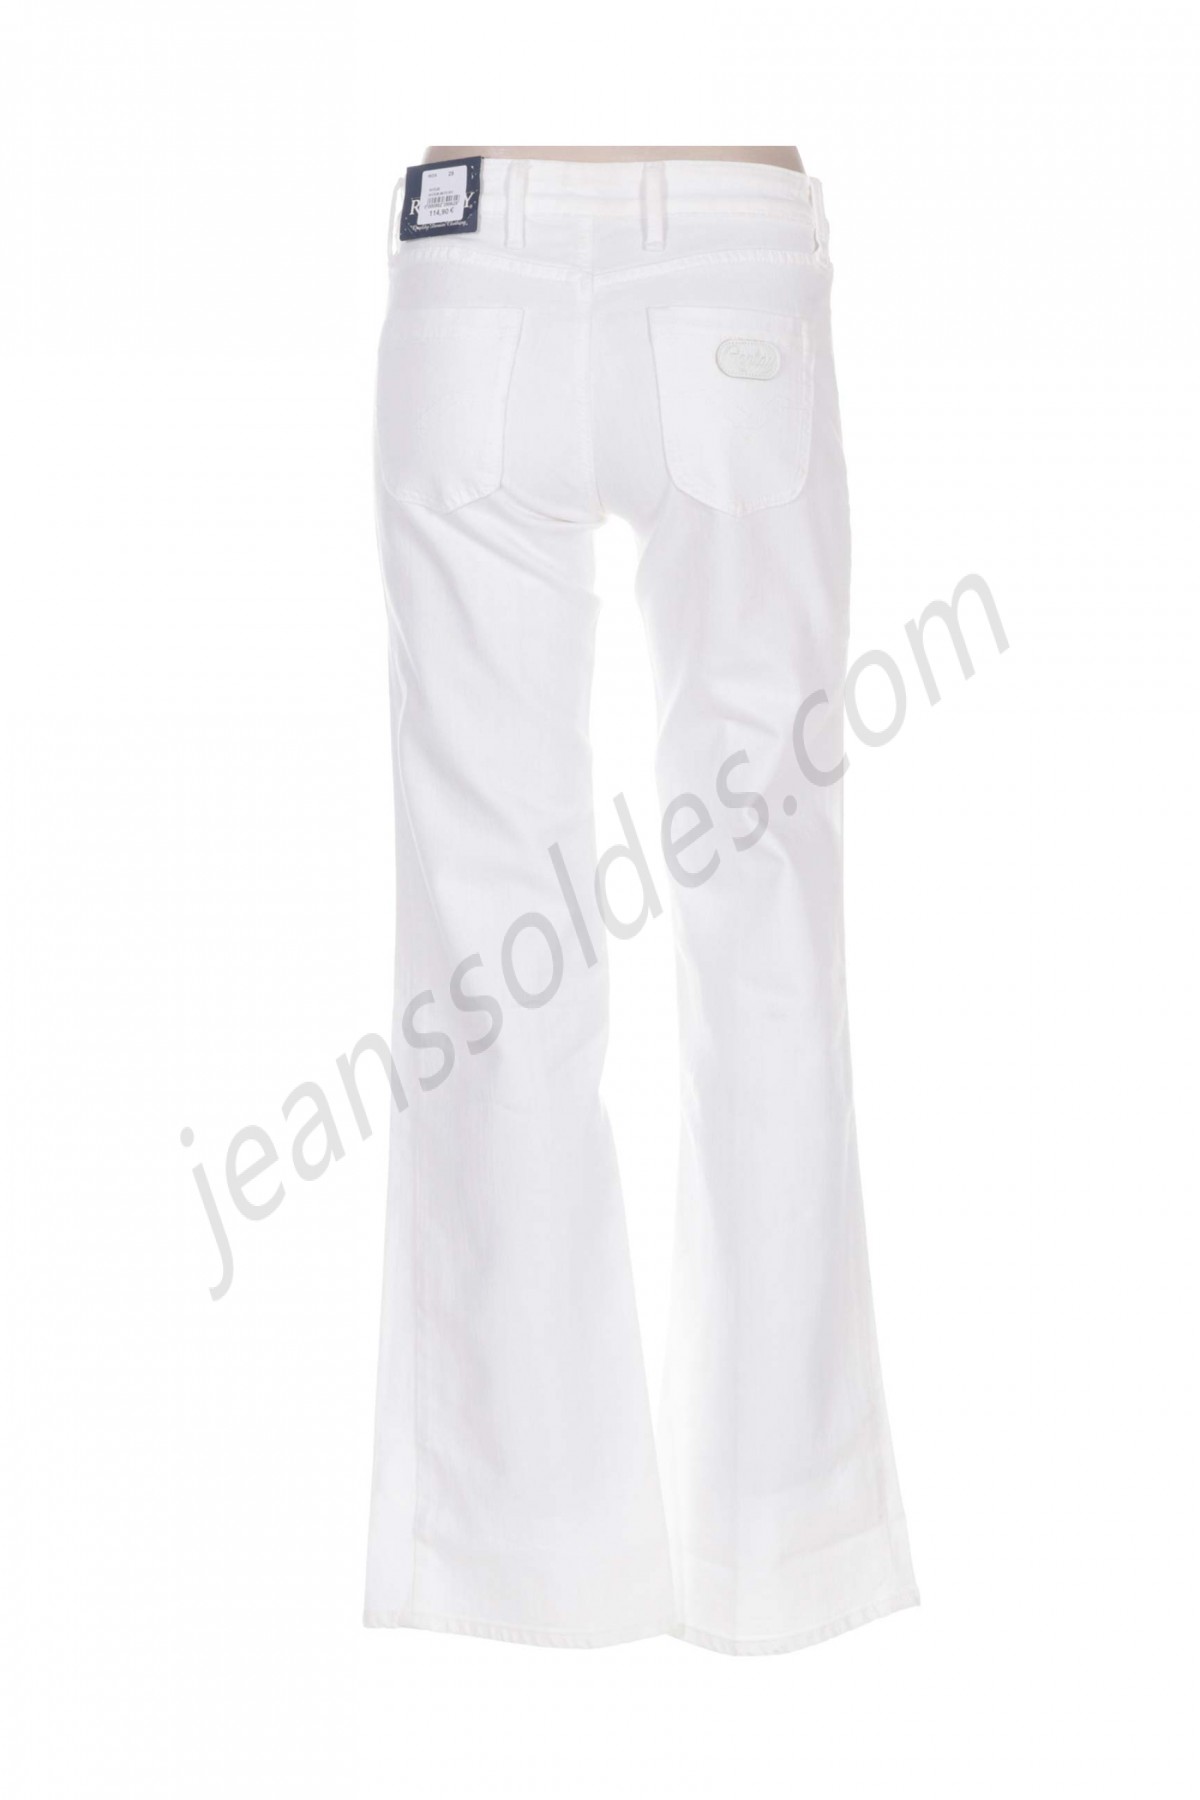 replay-Jeans coupe large prix d’amis - -1